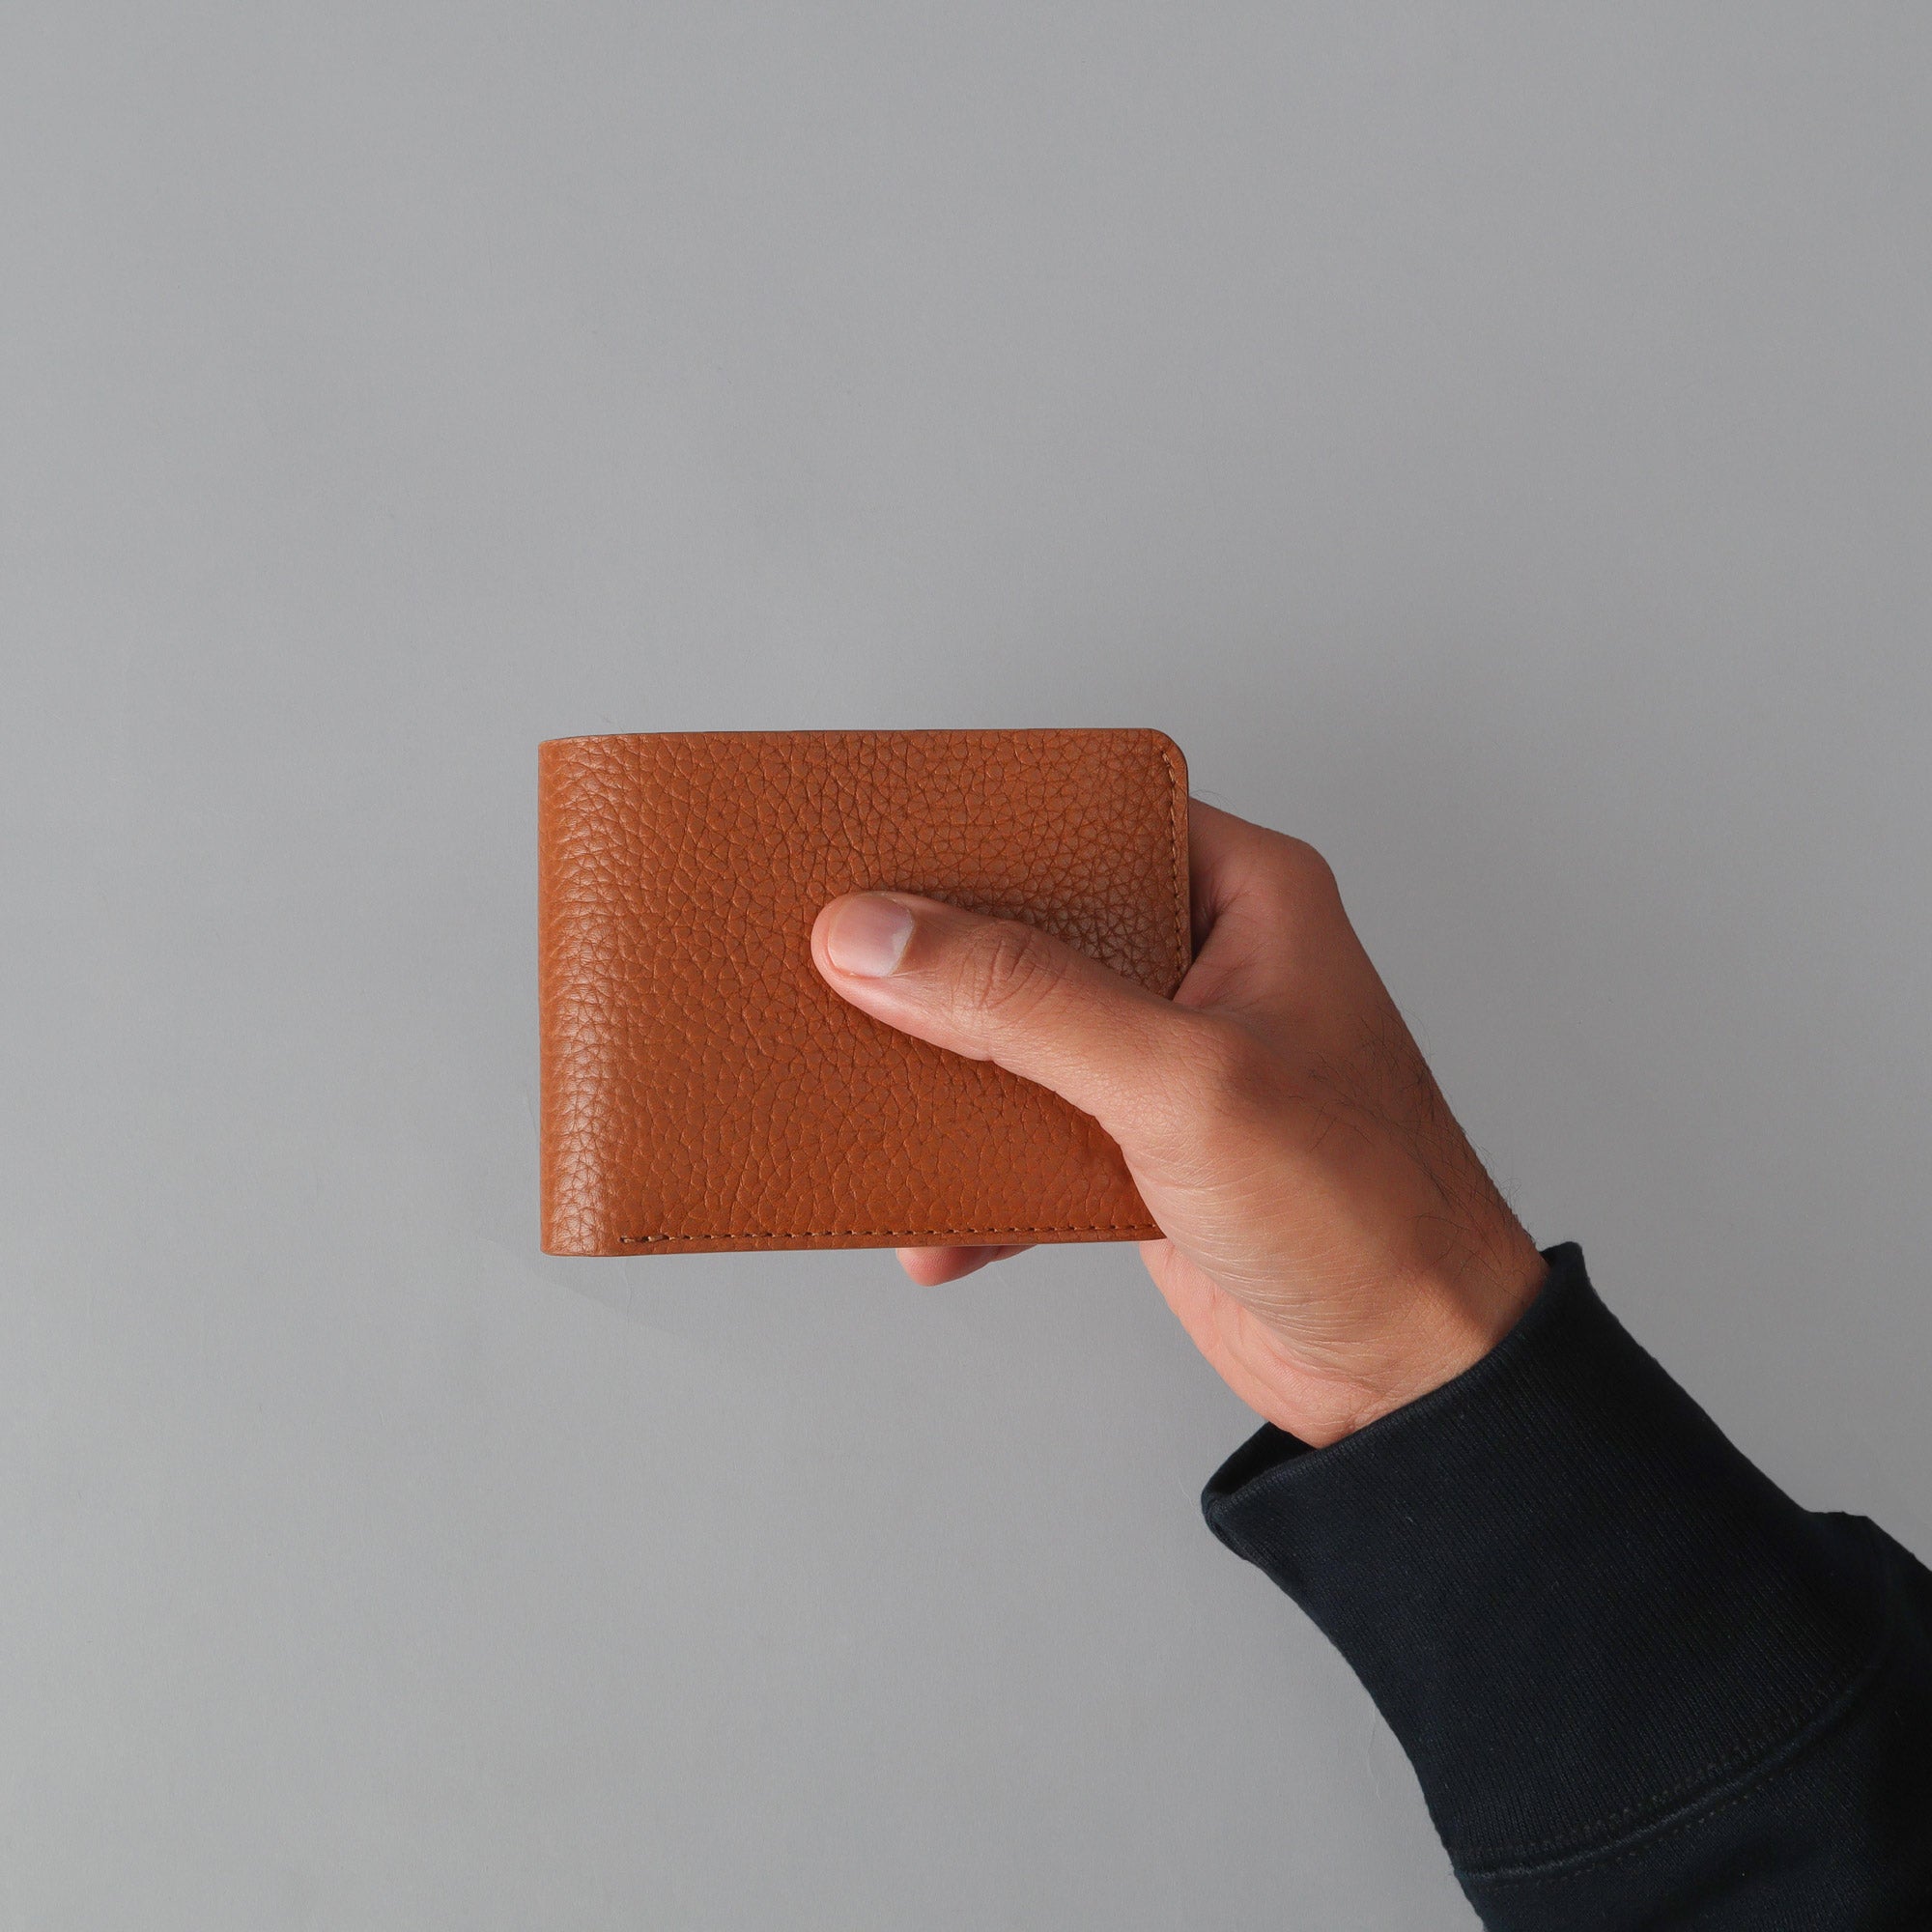 Bi-fold leather wallet with free engraving